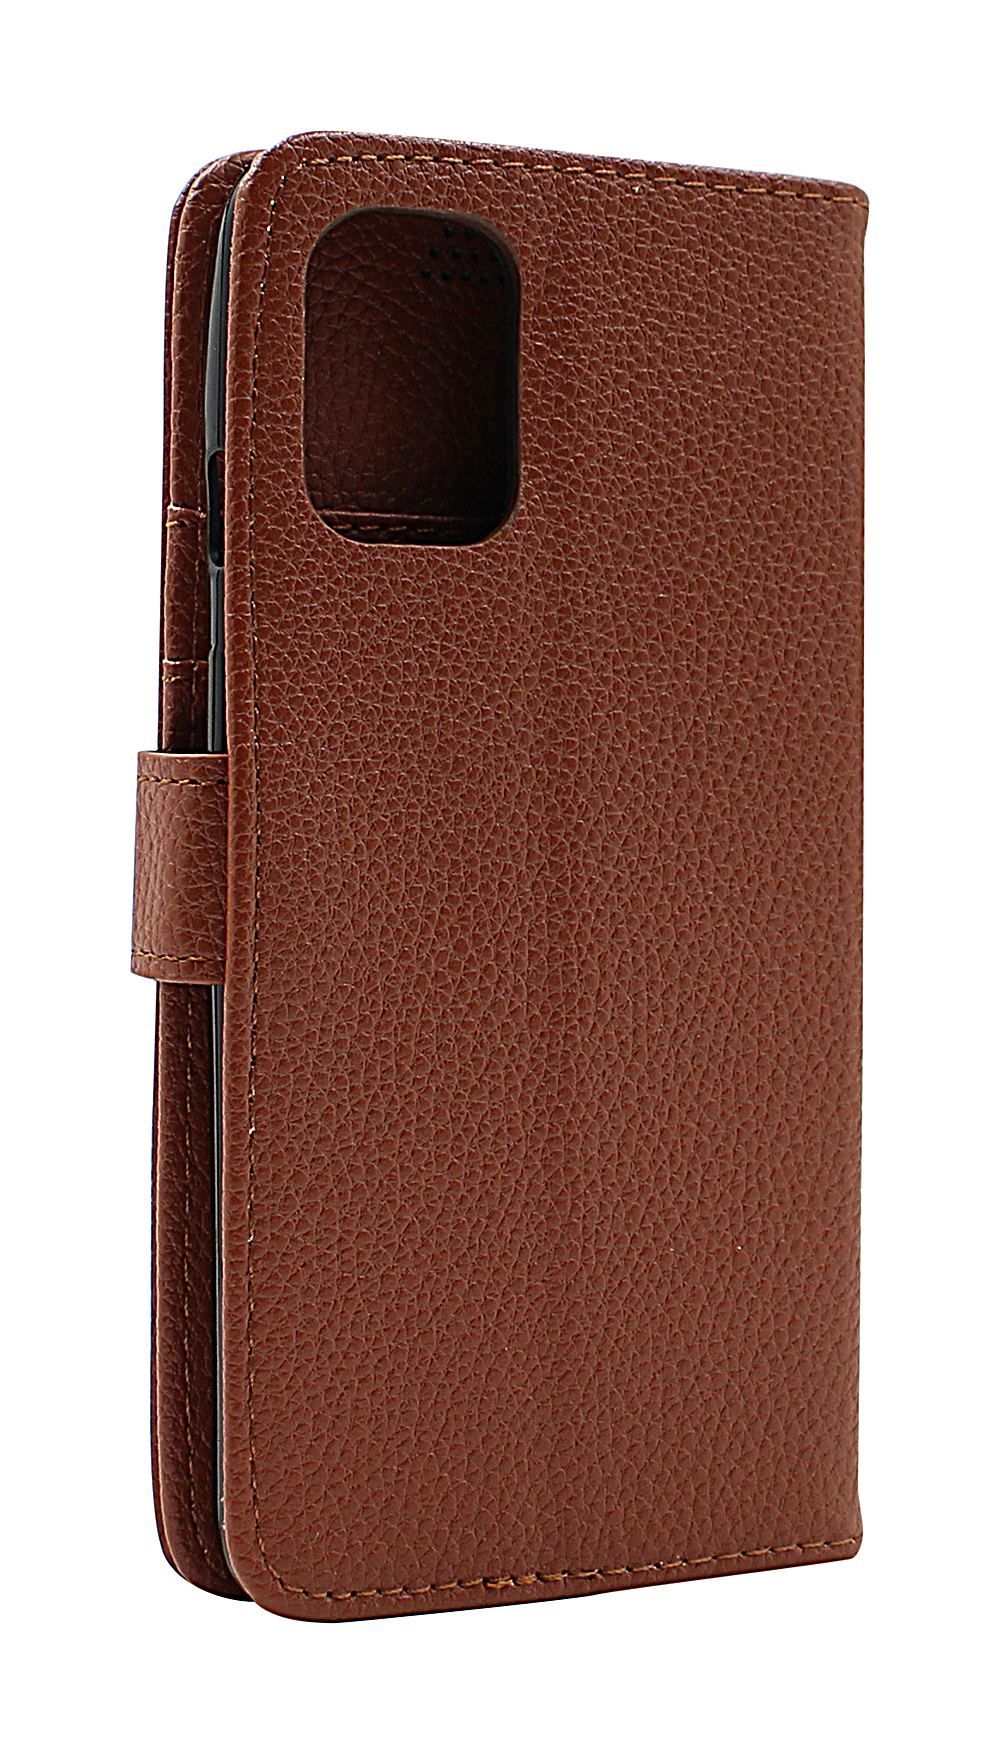 New Standcase Wallet OnePlus 8T